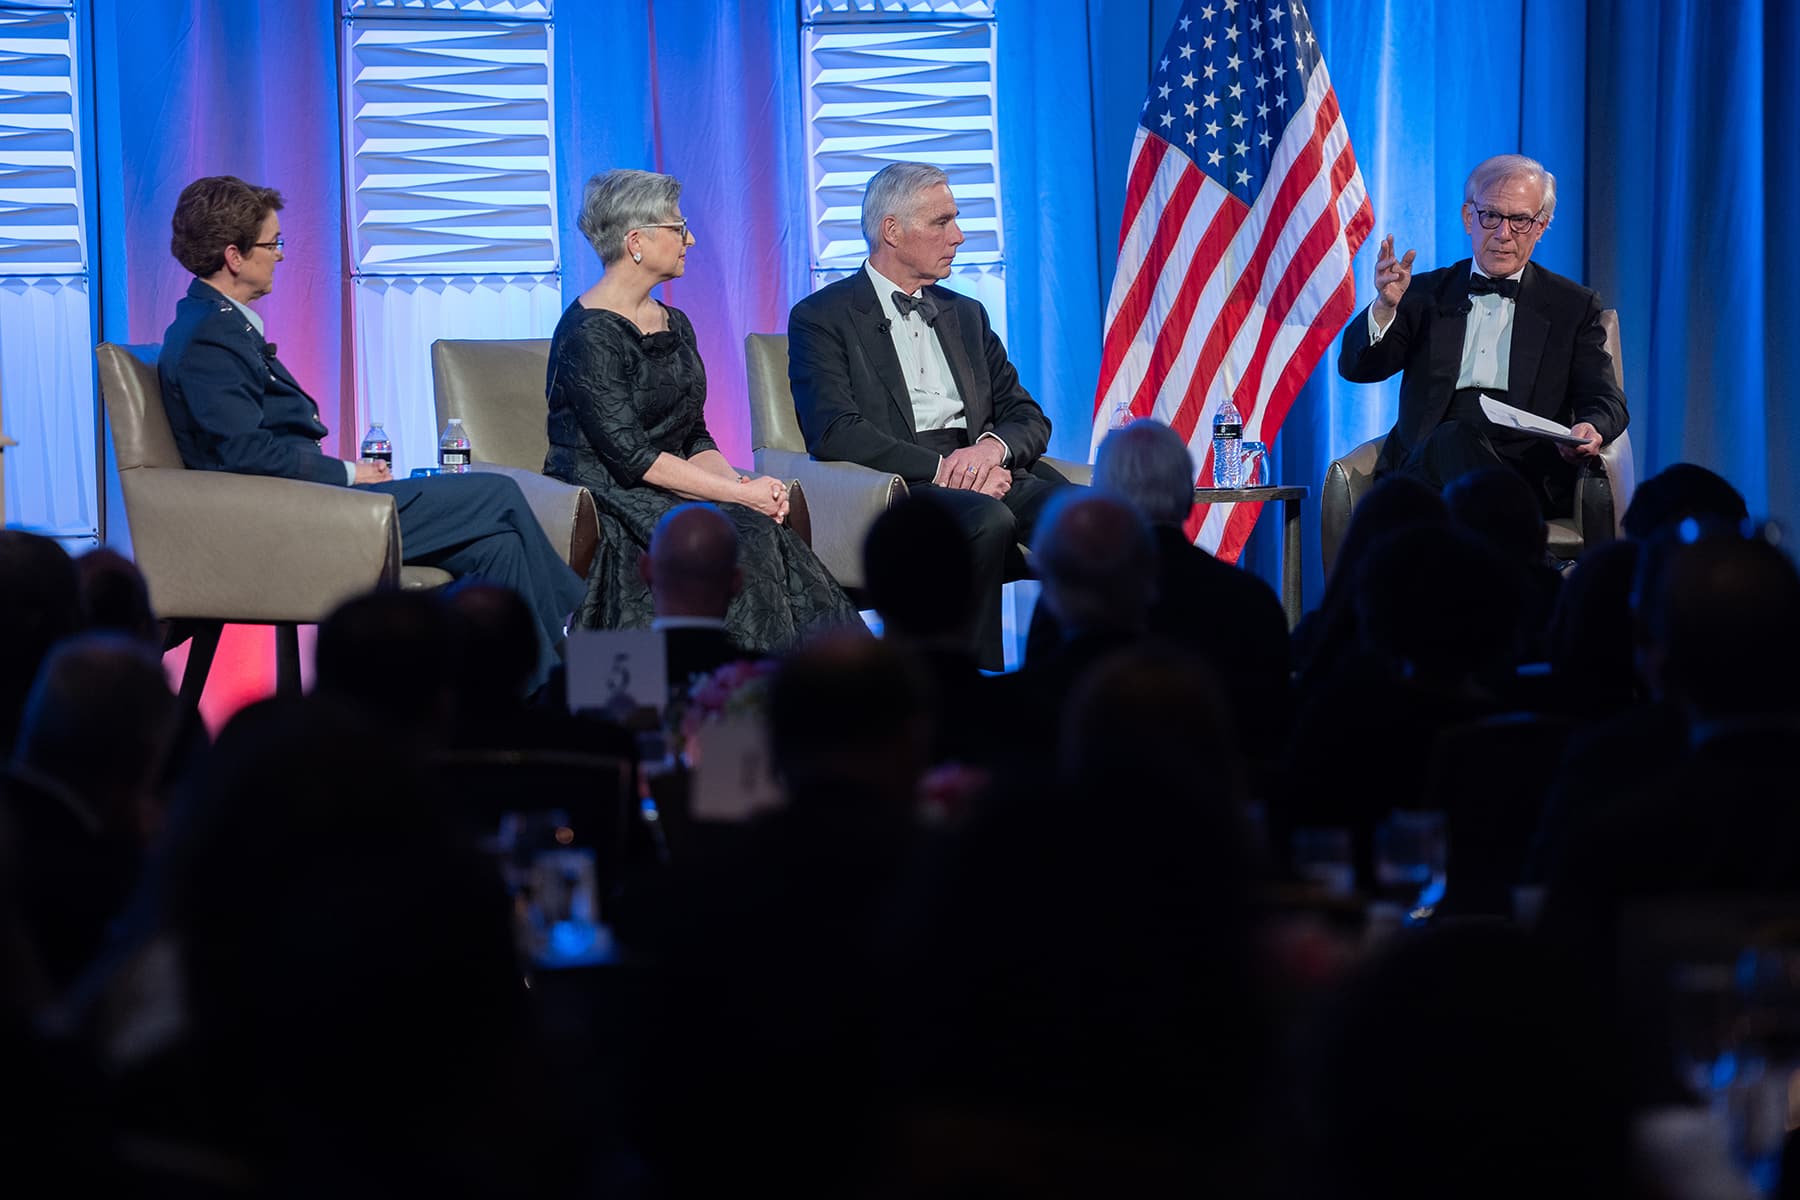 honorees fireside chat at 2022 Eisenhower Awards gala